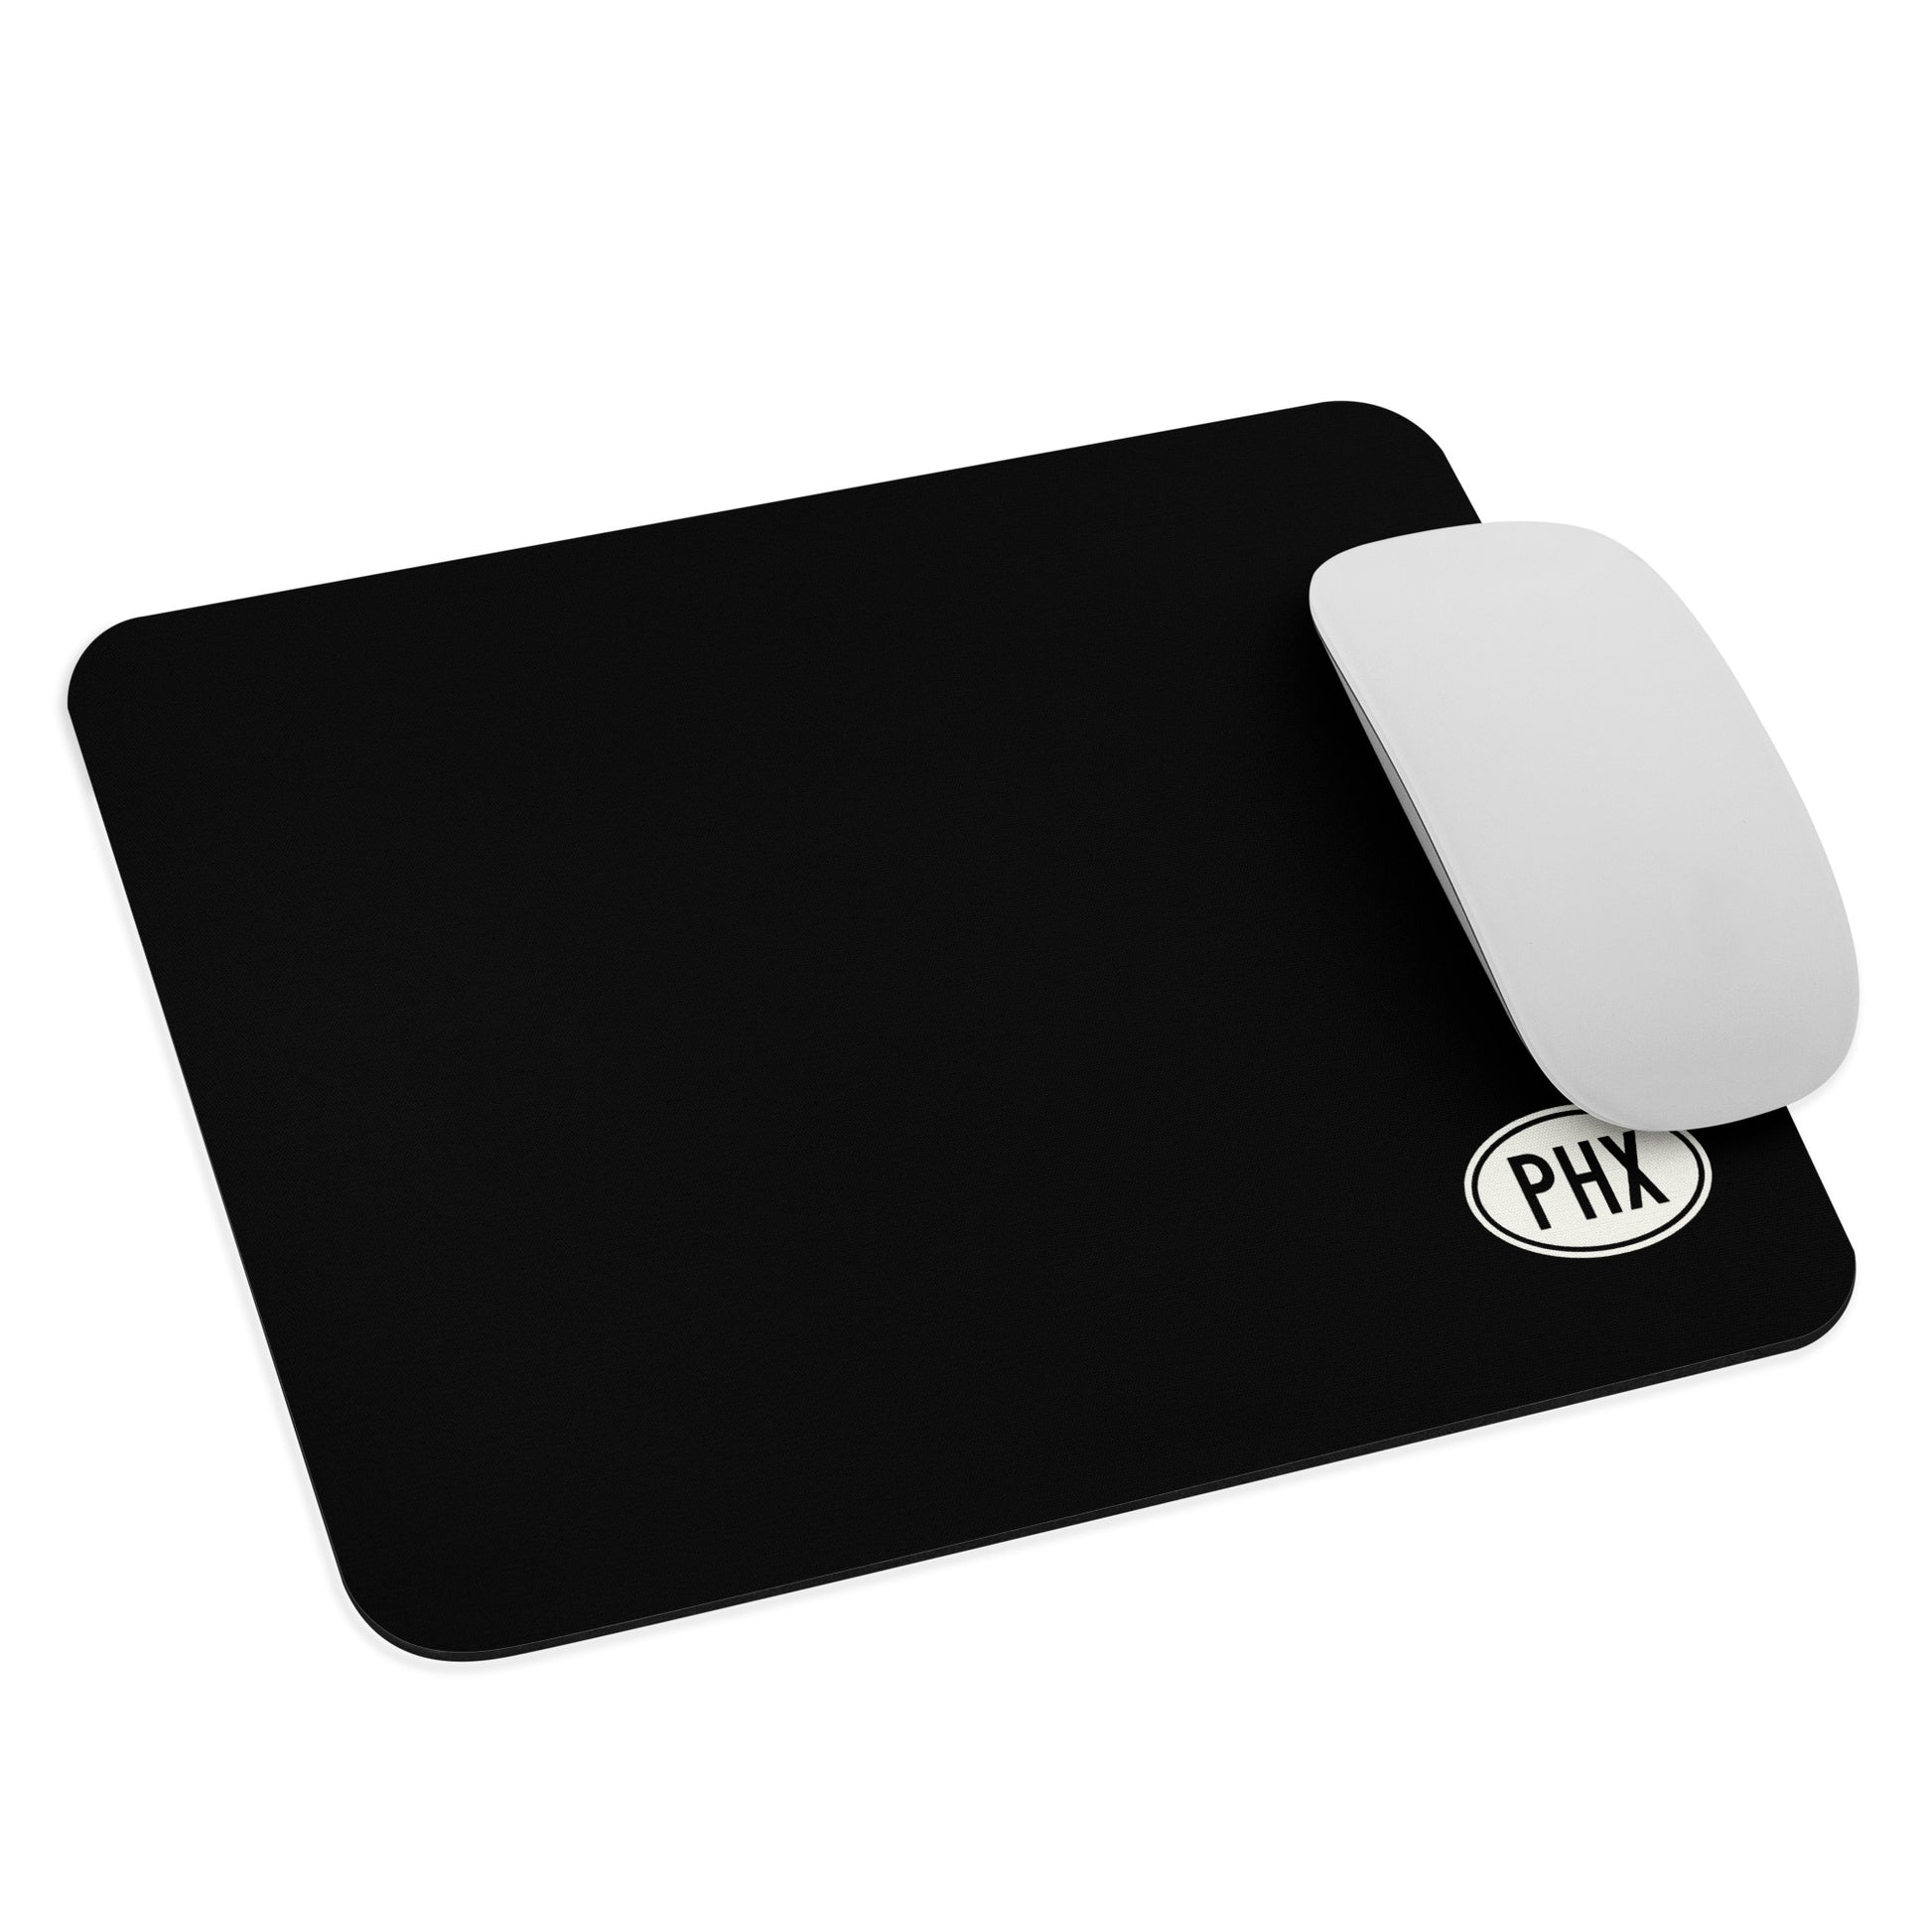 Unique Travel Gift Mouse Pad - White Oval • PHX Phoenix • YHM Designs - Image 03